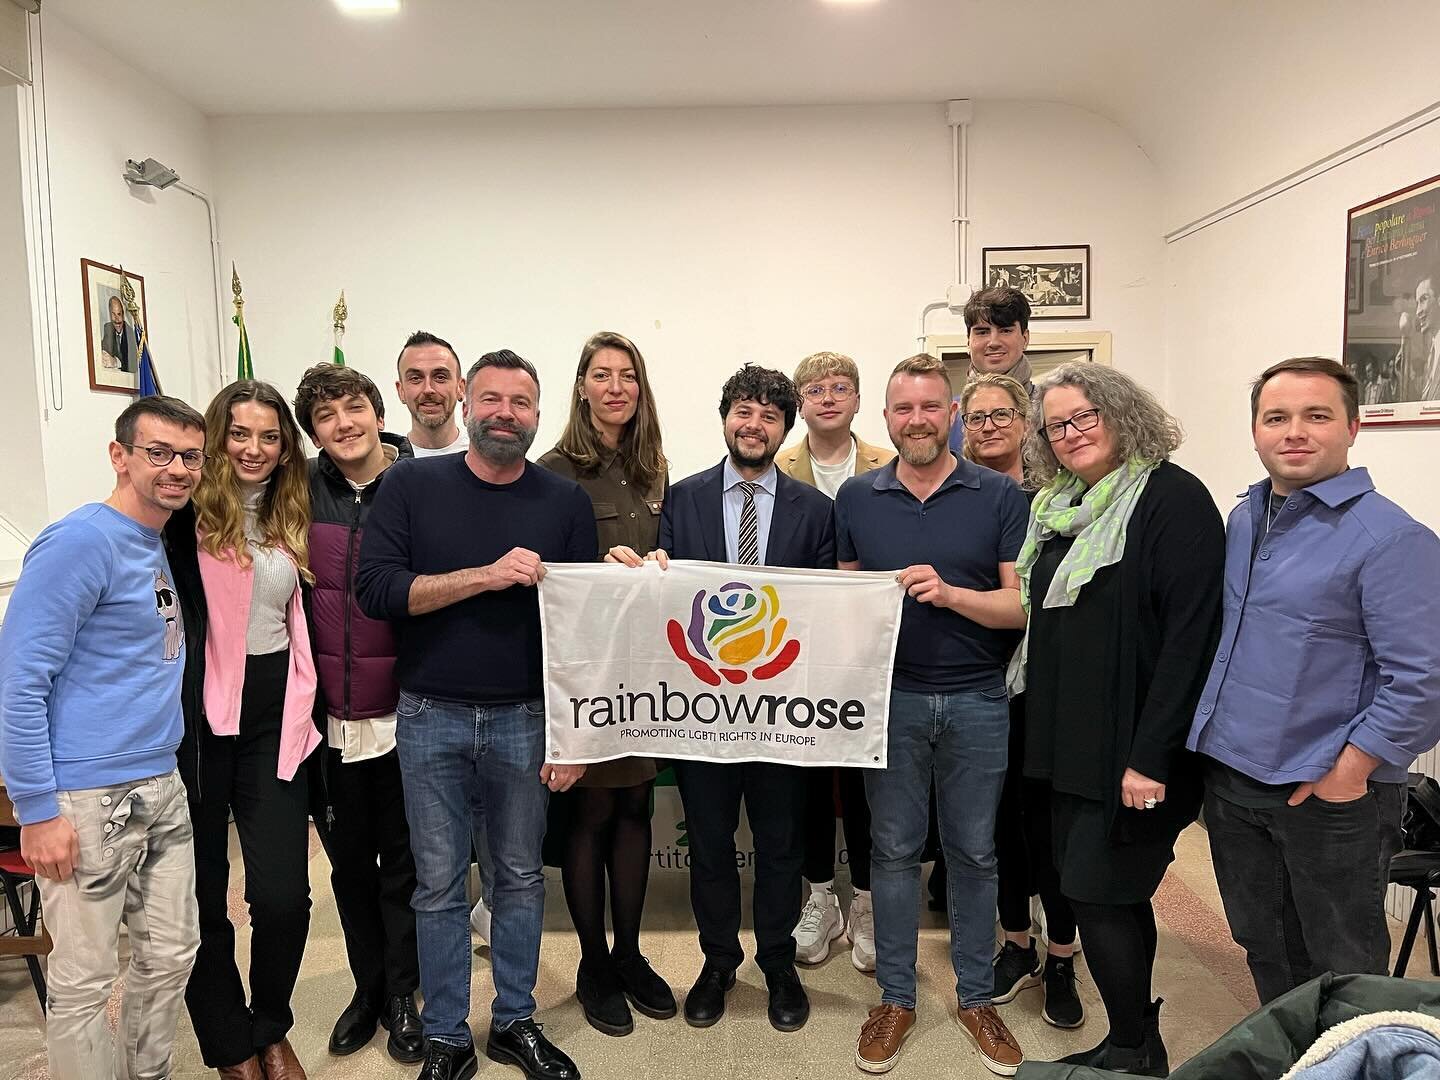 LGBTIQ+ rights in Europe: the challenges ahead 

Ahead of the @pes_pse Congress in Rome we had an event with European and especially italien LGBTIQ+ politicians and activists. We want to thank all participants for their very important work and for th